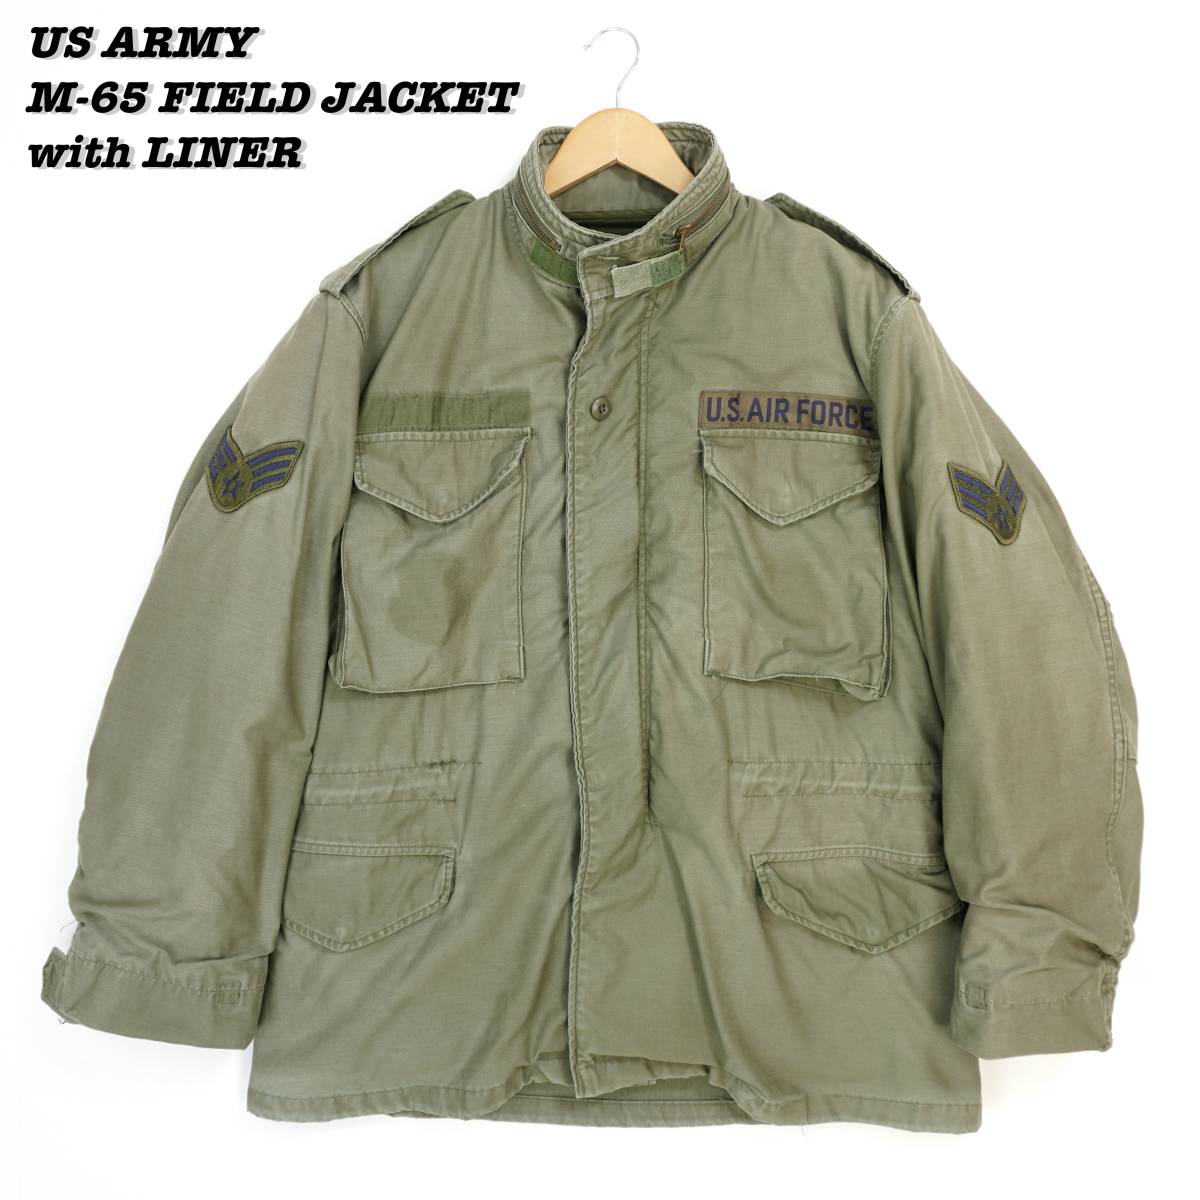 US ARMY M-65 FIELD JACKET with LINER 304220 Vintage アメリカ軍 フィールドジャケット ライナー 1980年代 ヴィンテージ